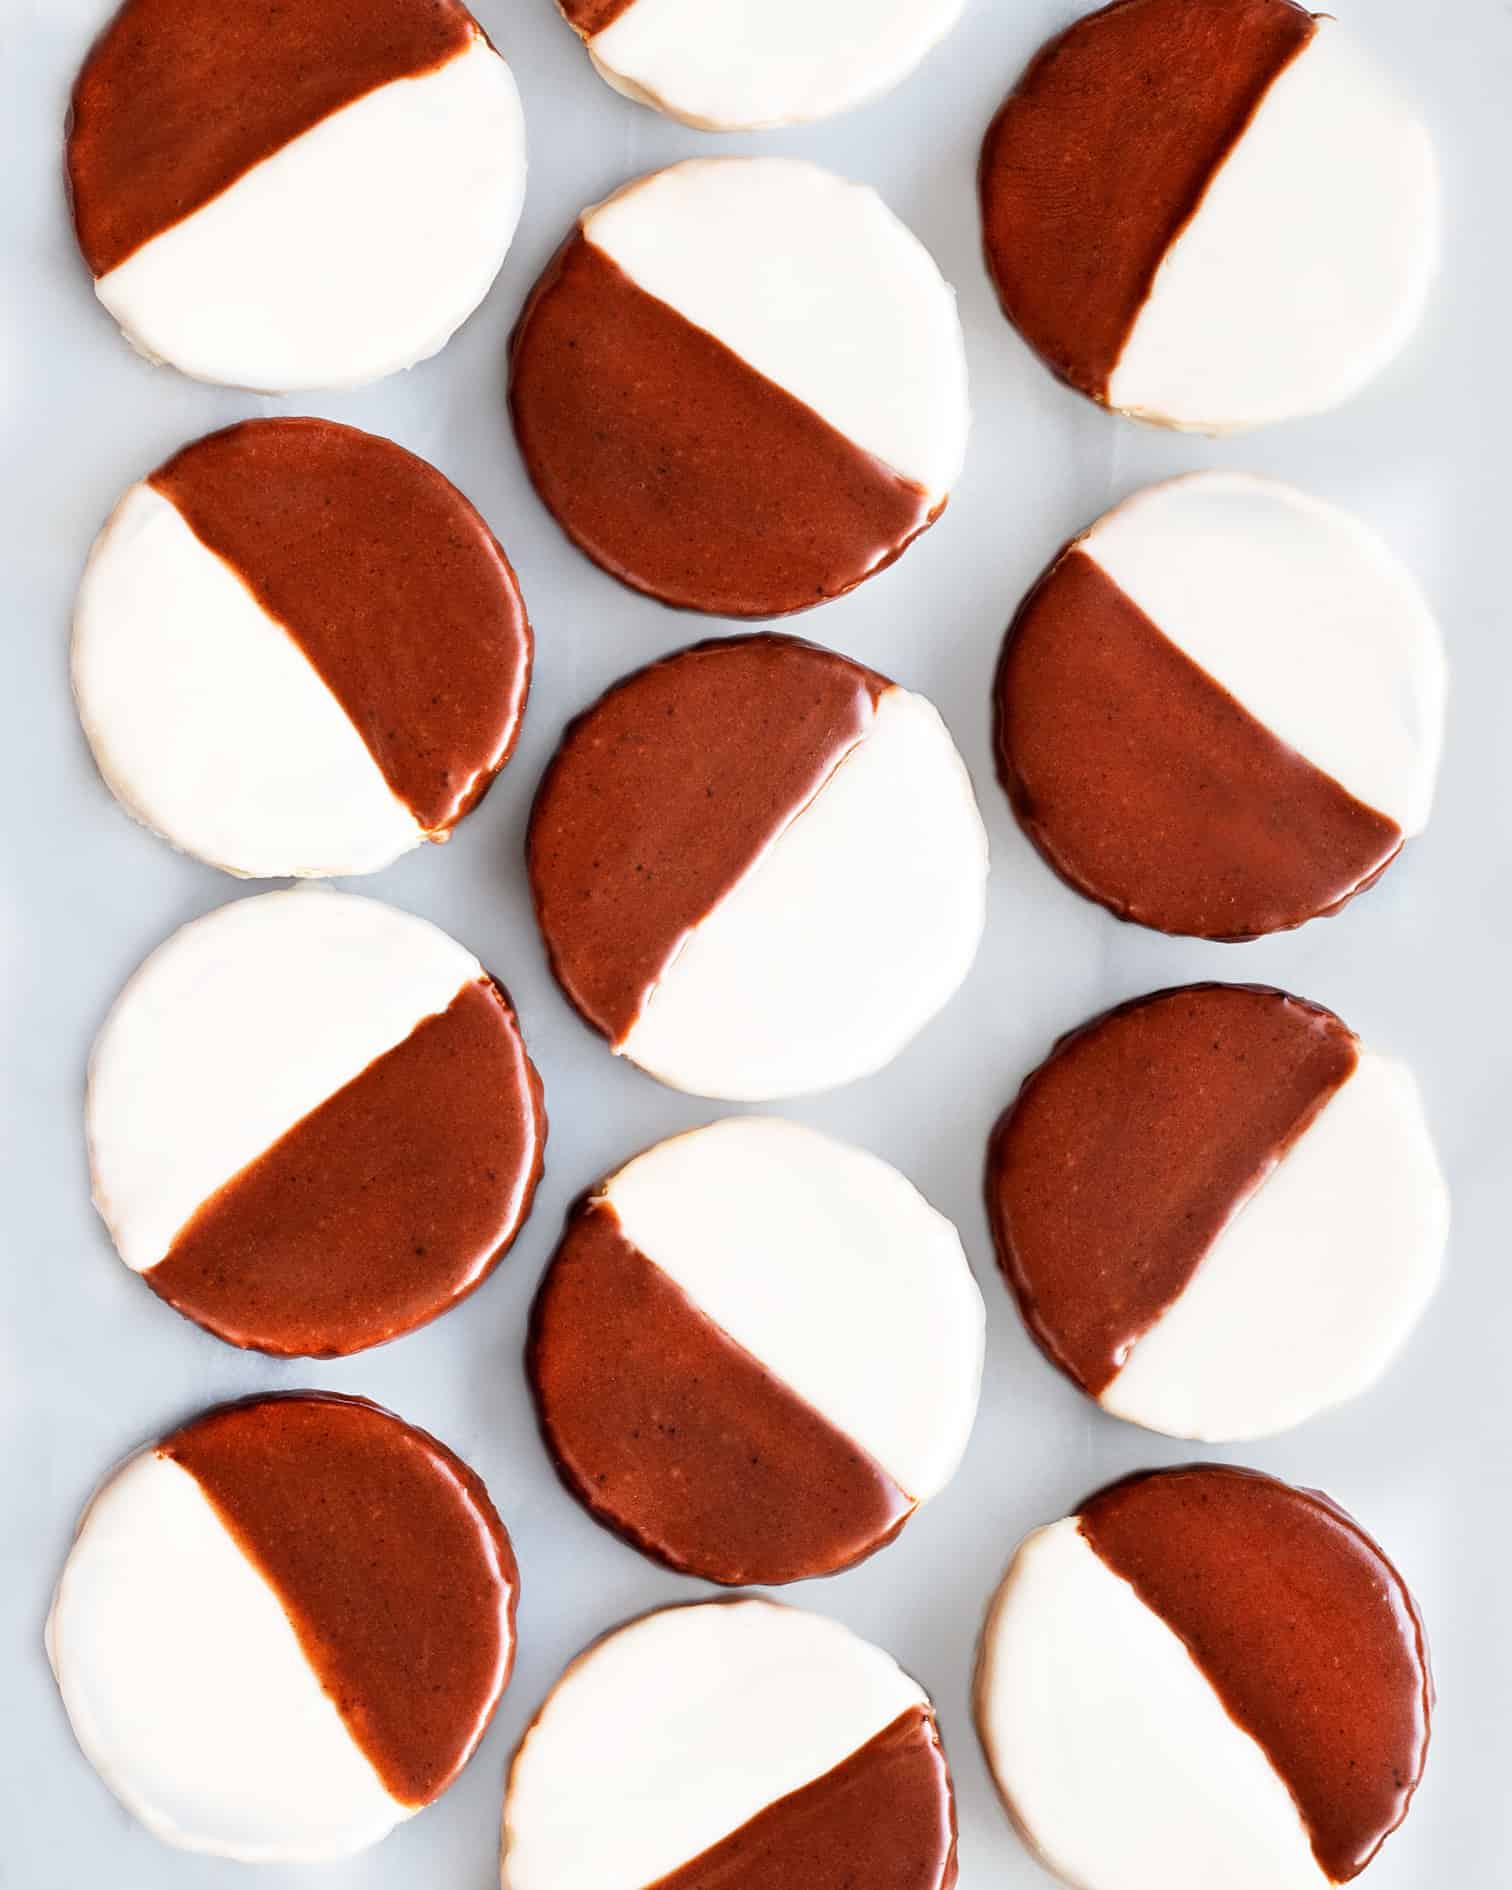 Black and White Cookies